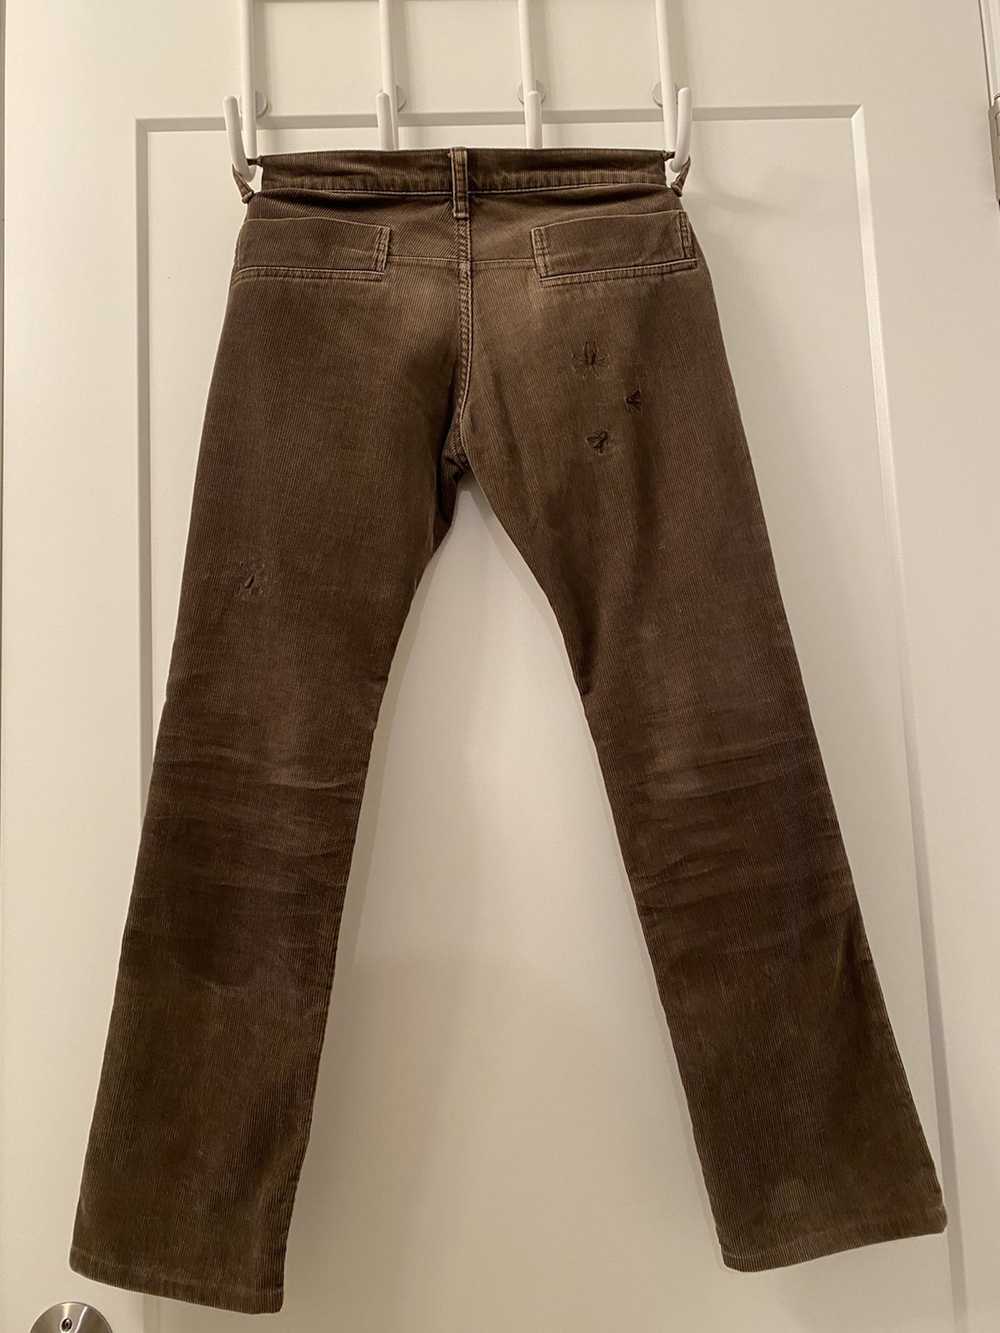 Undercover AW06 Corduroy Insect Jeans - image 2